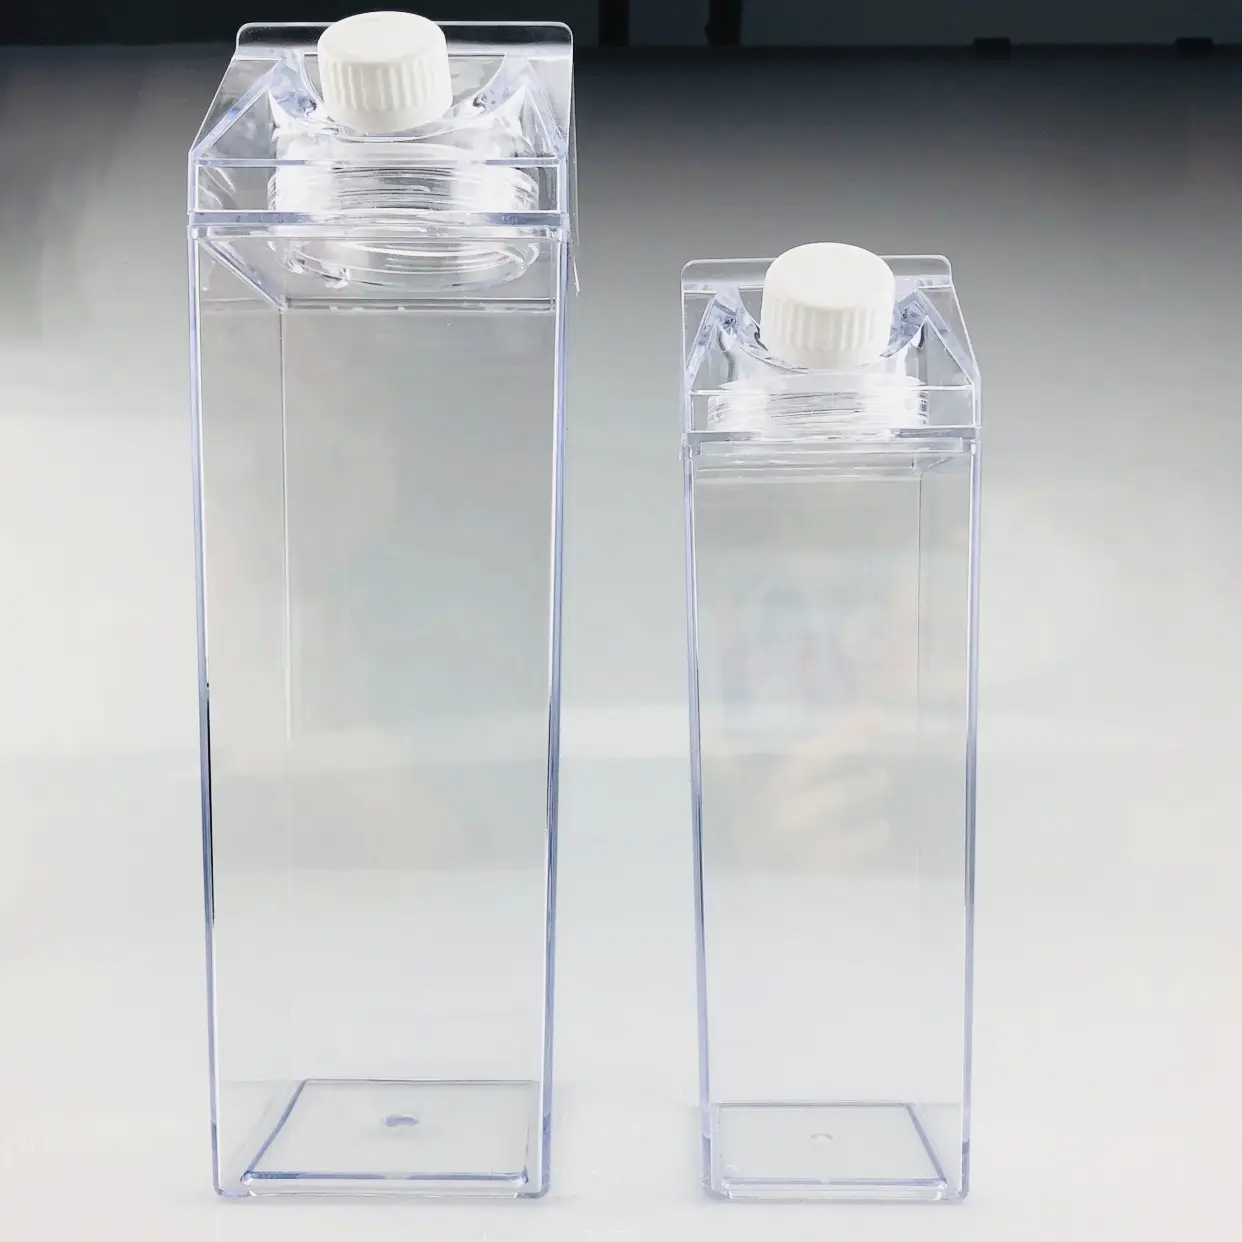 500ml Double Wall Wholesale Inventory Milk Leak Proof Acrylic Plastic Water Cup Bottle Tumblers with Screw cover